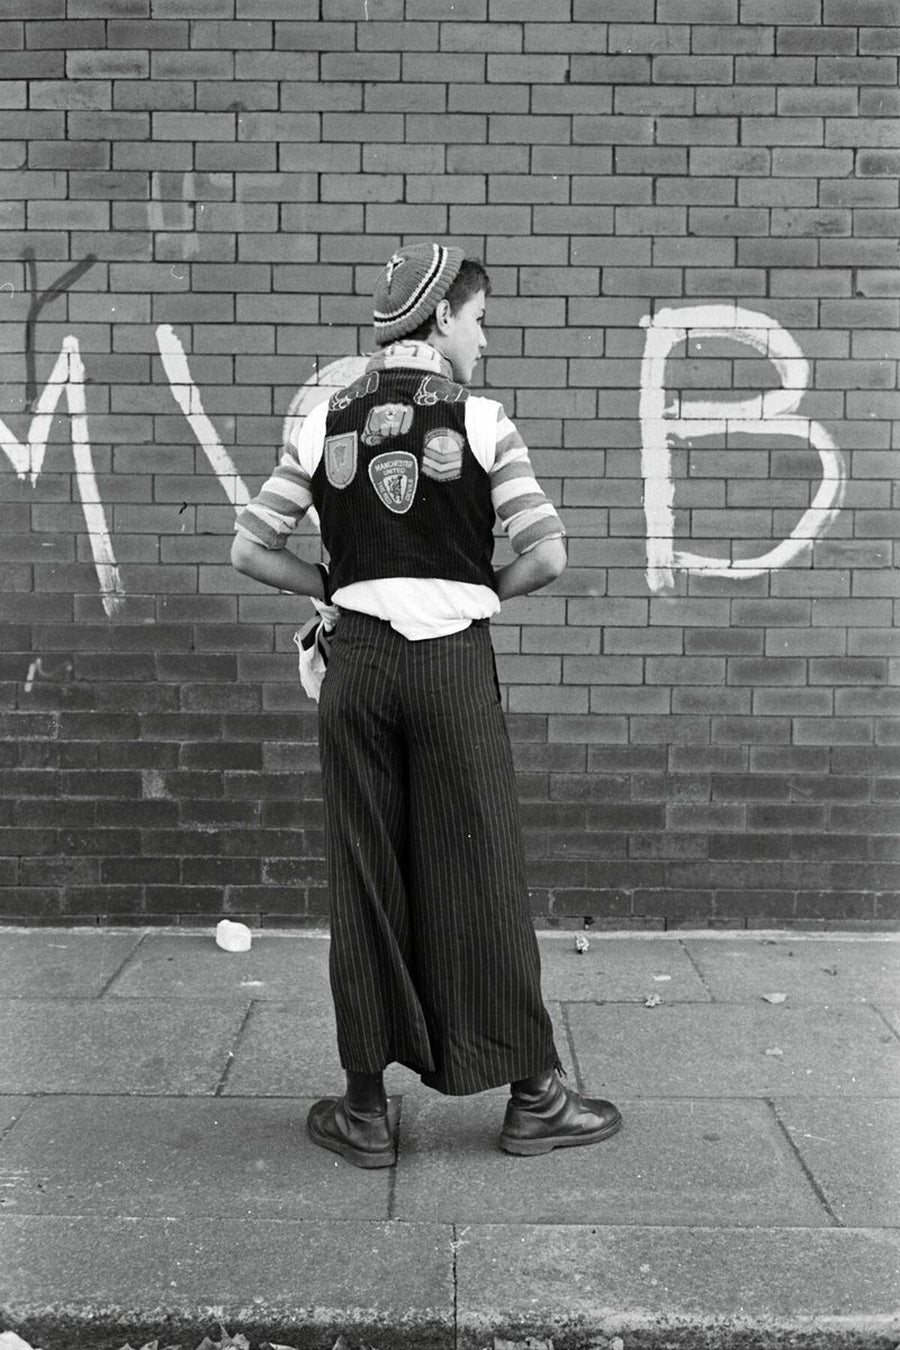 Manchester United Fan with Beanie by Iain S.P. Reid - c. 1976